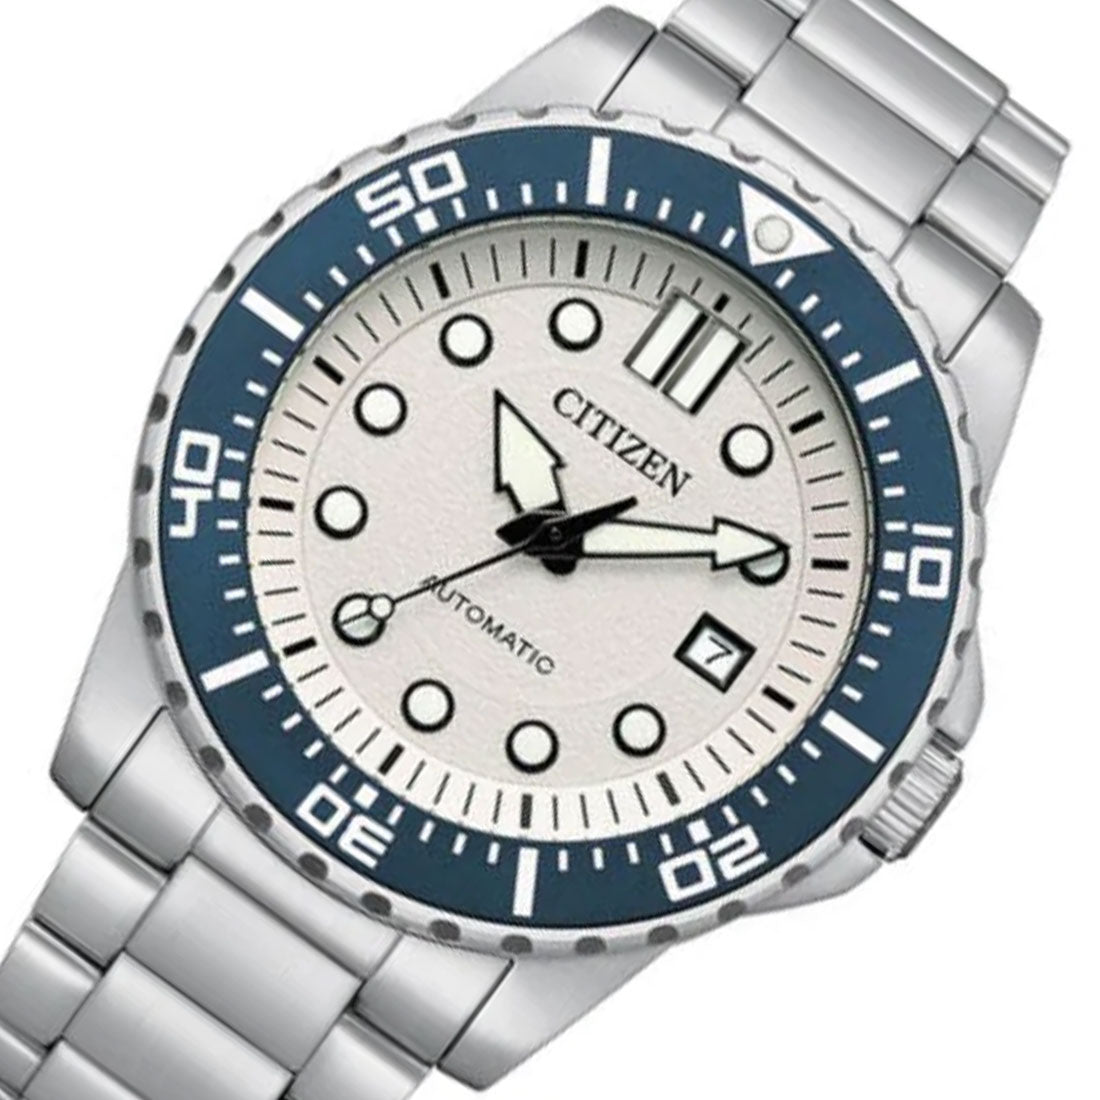 Citizen Mechanical NJ0171-81A White Dial Stainless Steel Mens Sports Watch -Citizen